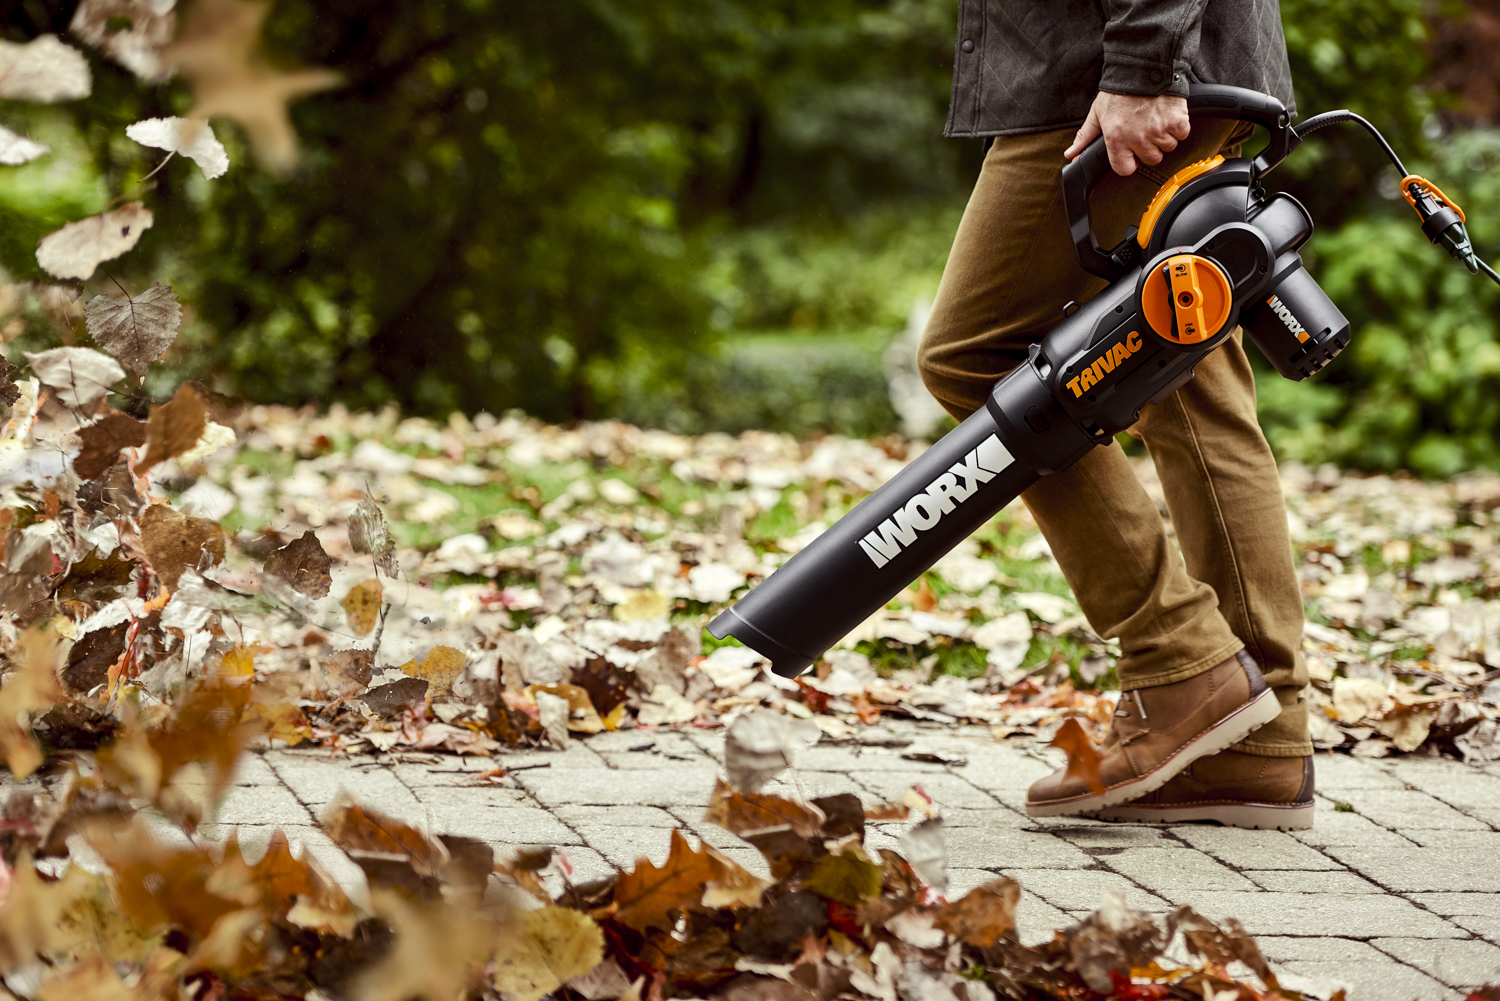 WORX TRIVAC blowing leaves